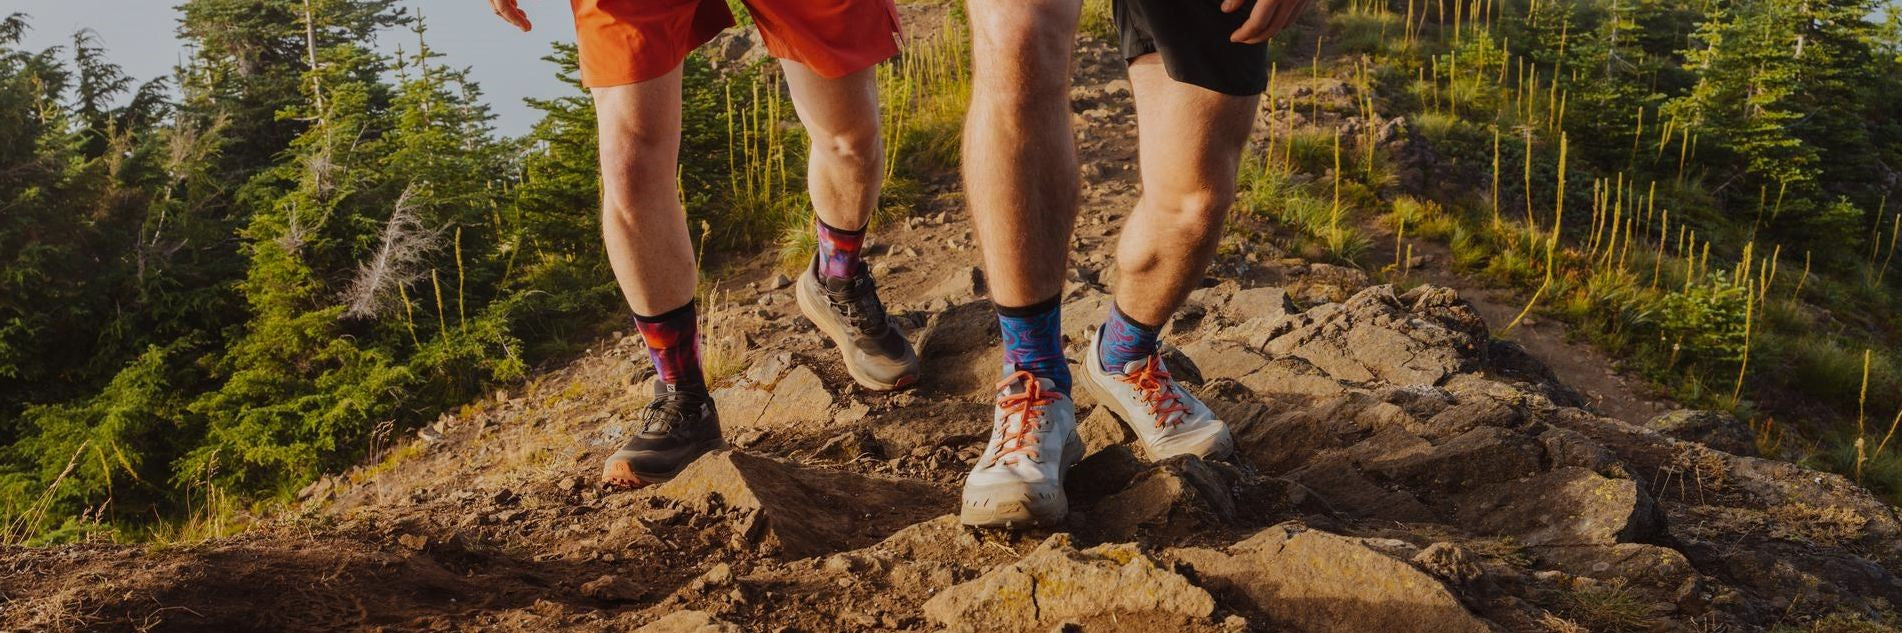 closeup of two hikers' legs wearing Swiftwick socks and trail running shoes on rugged dirt trail